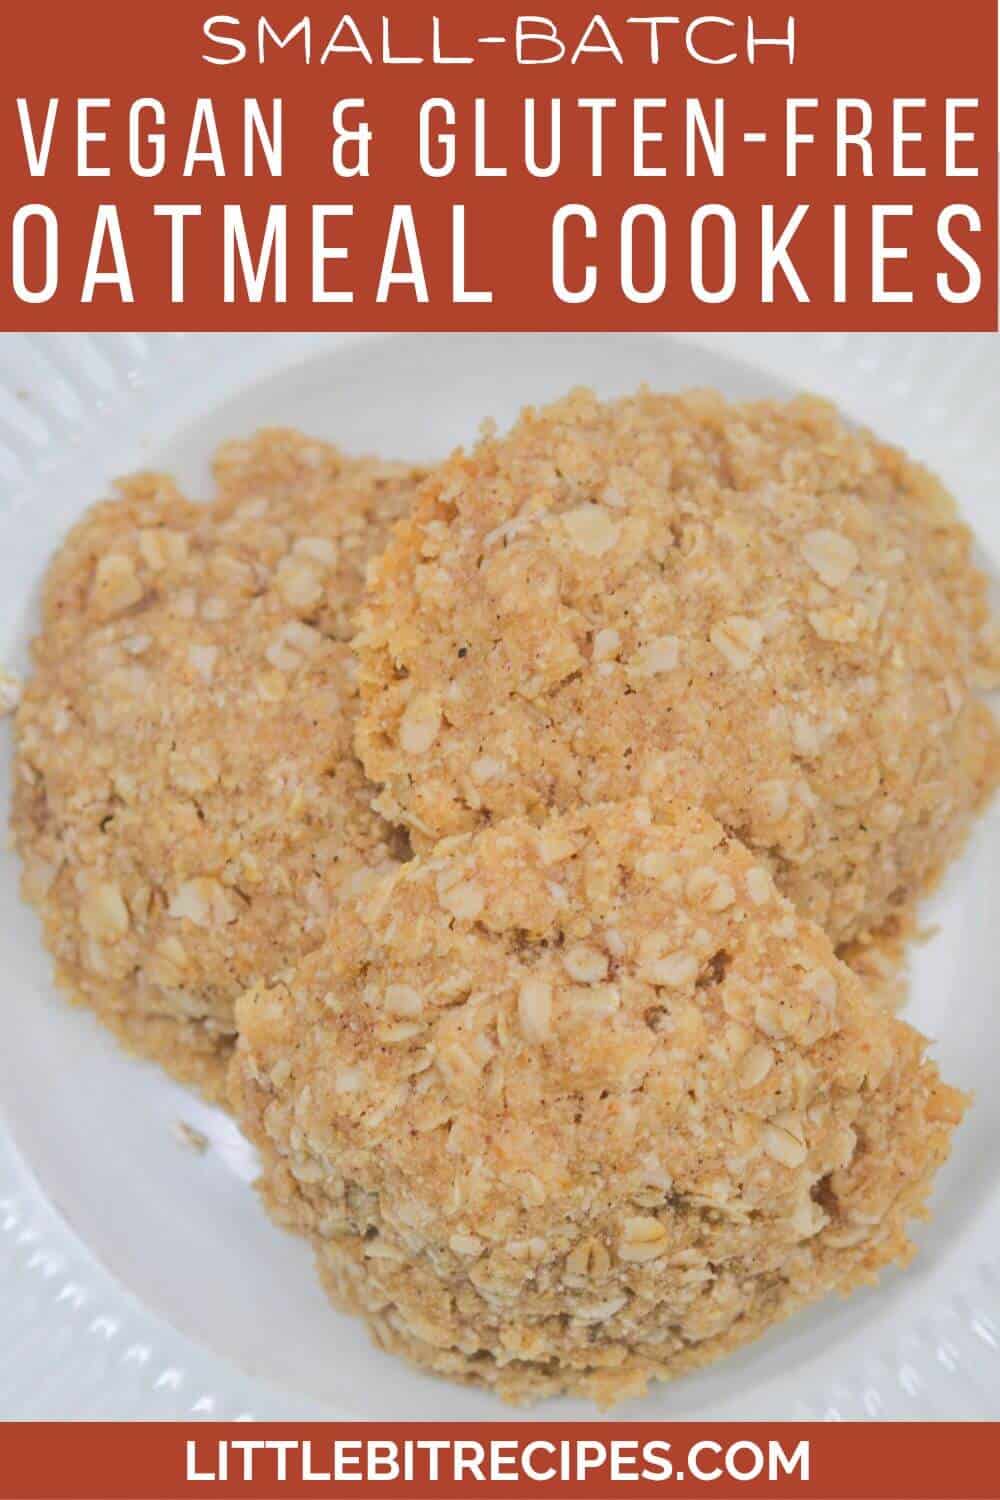 Vegan gluten-free oatmeal cookies on plate with text.